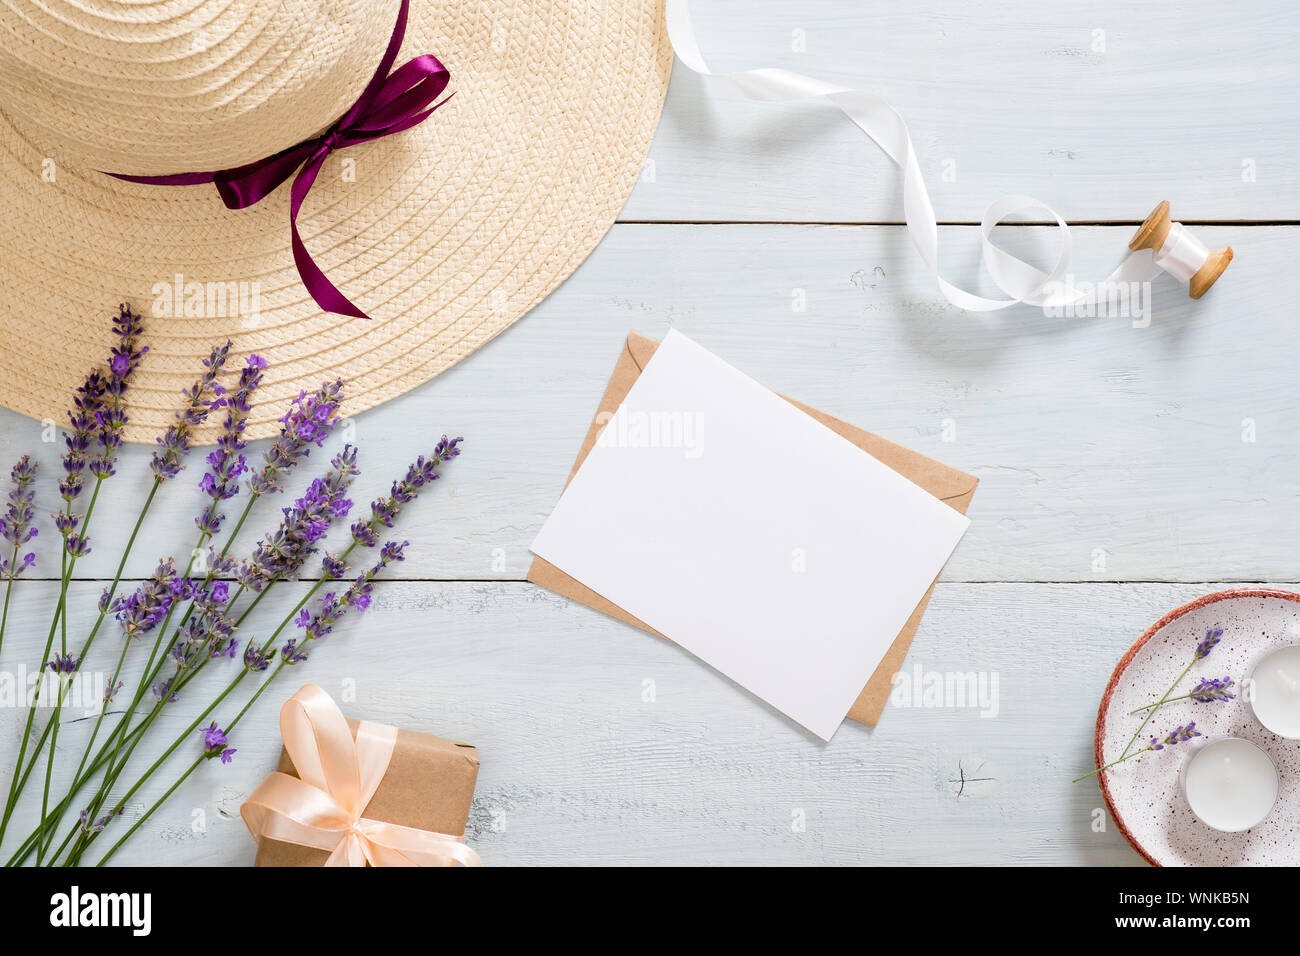 Flatlay composition with straw hat, lavender flowers, paper card mockup, craft envelope, ribbon, gift box, candles. Feminine desk table with romantic Stock Photo